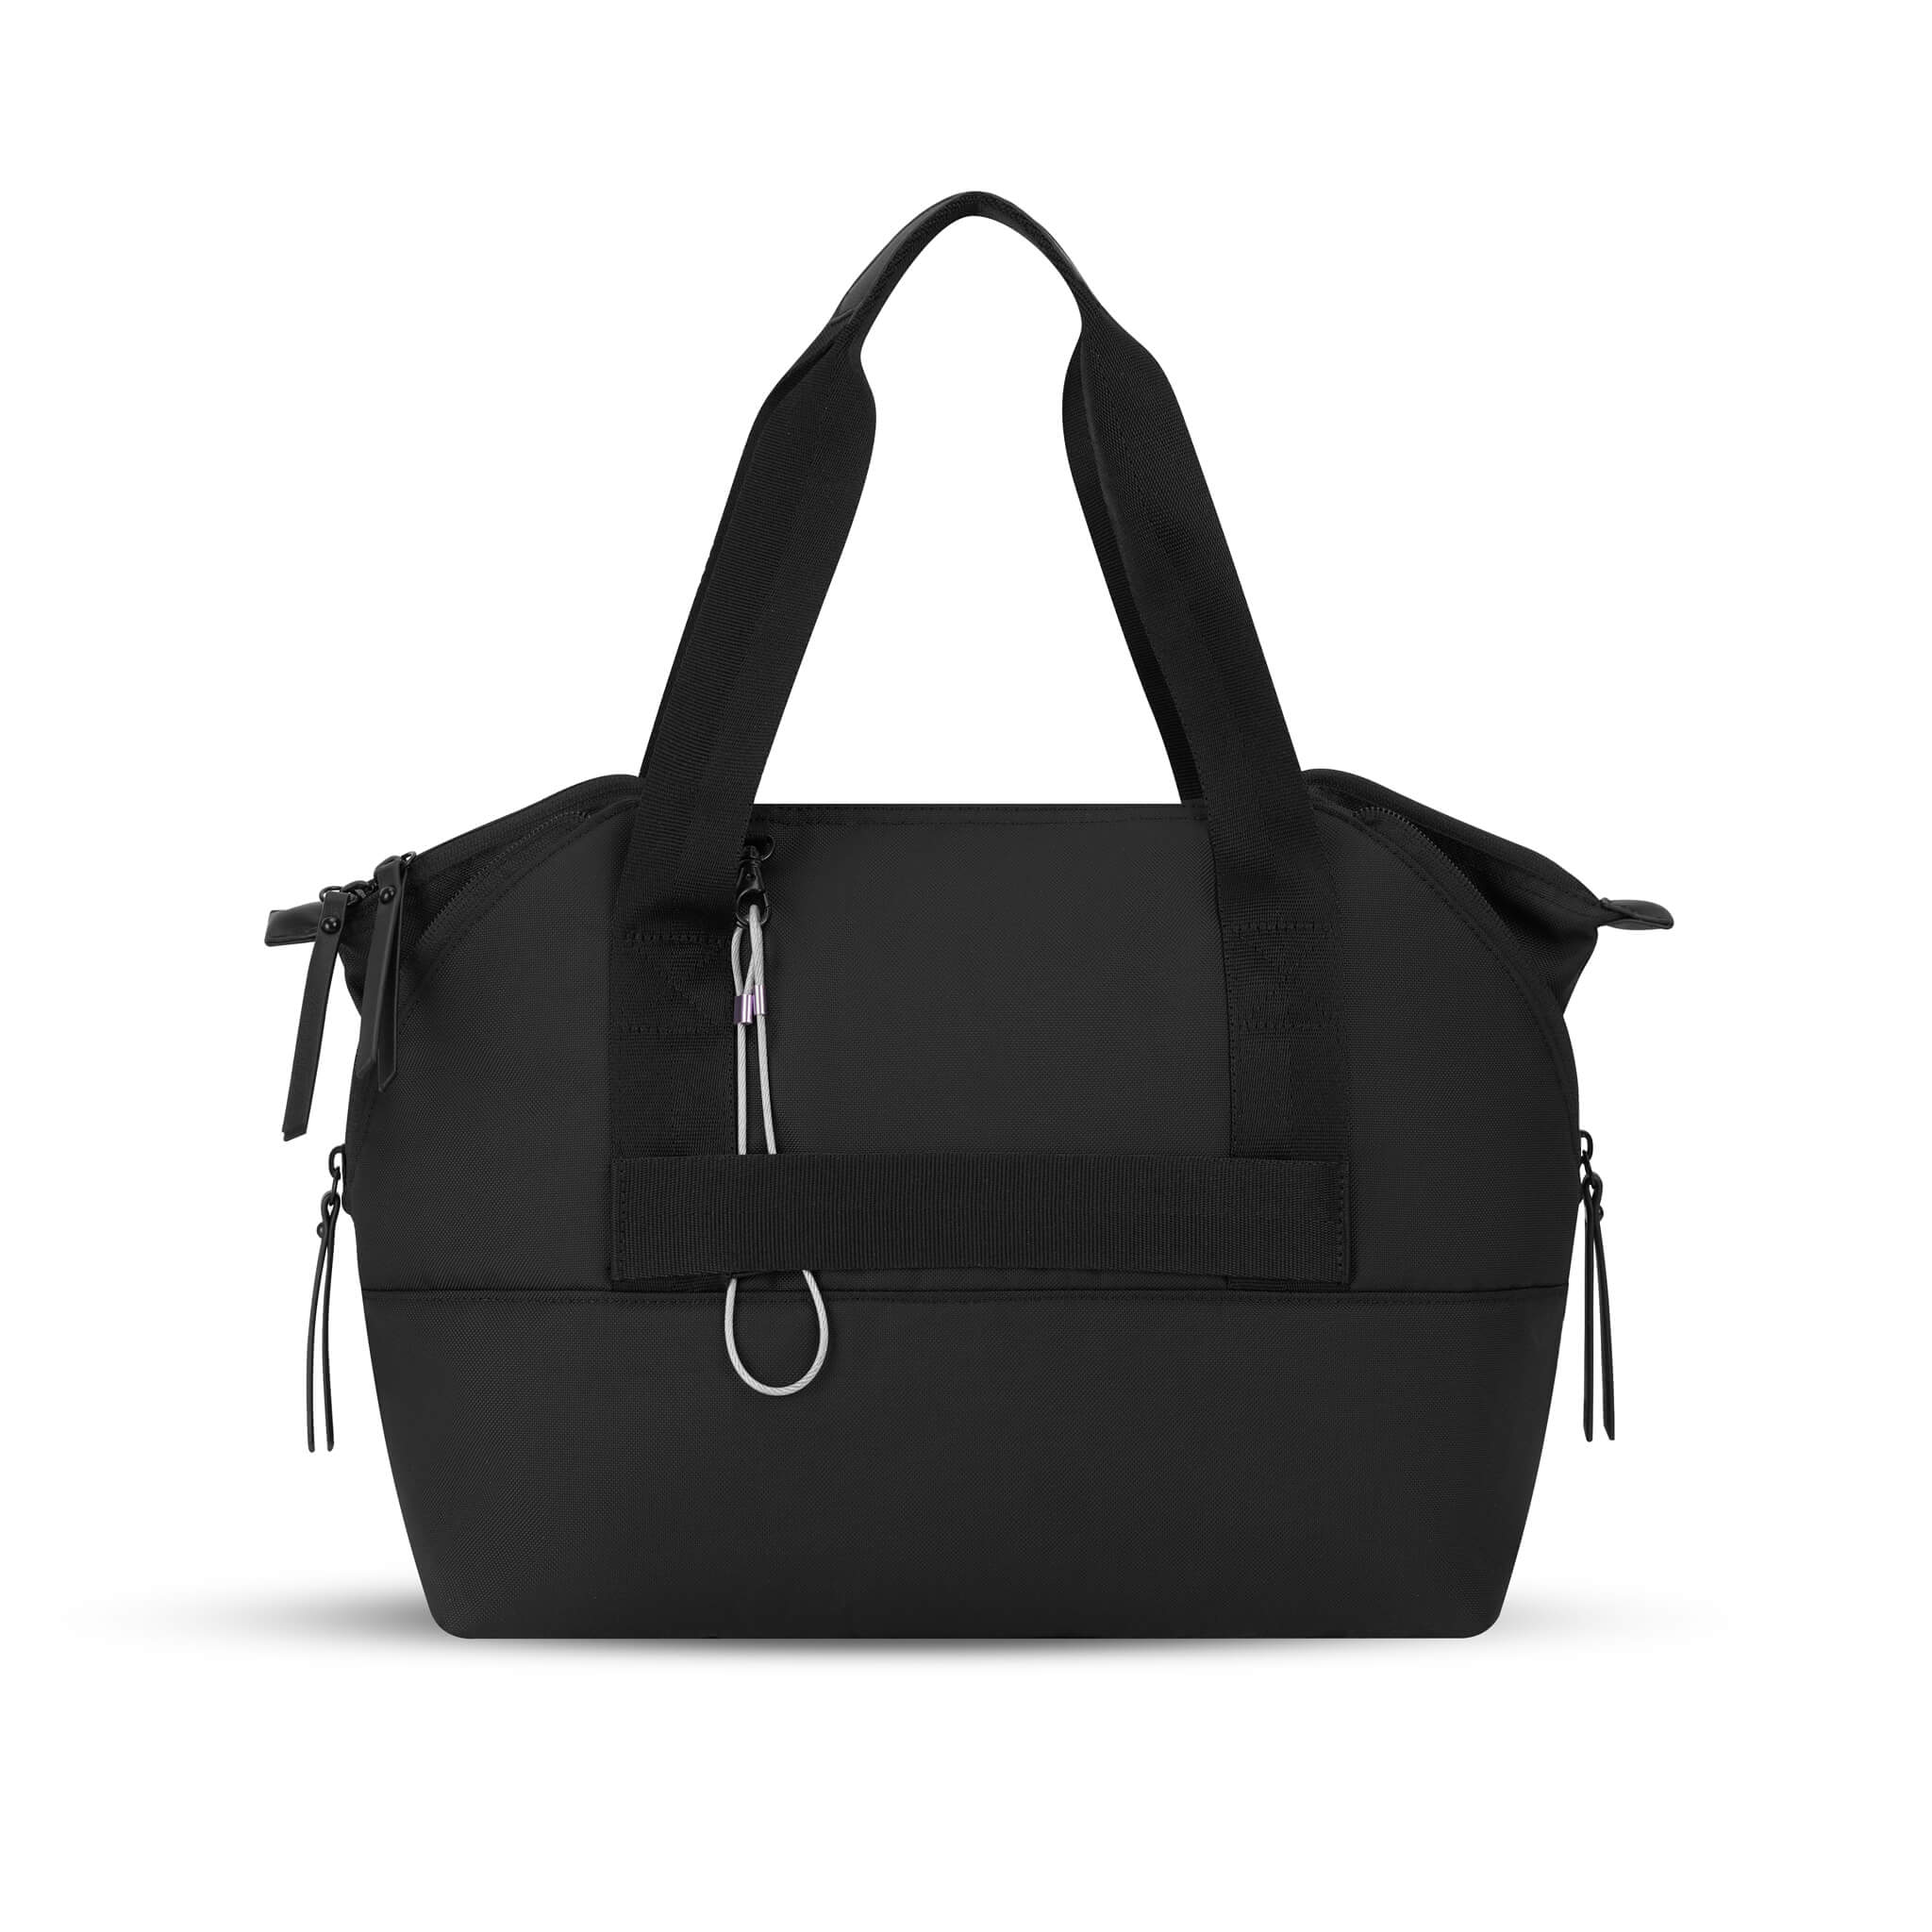 Back view of Sherpani Eclipse Anti-Theft tote in Carbon. Bag features include a wire-loop chair lock to prevent theft and a trolley sleeve. 